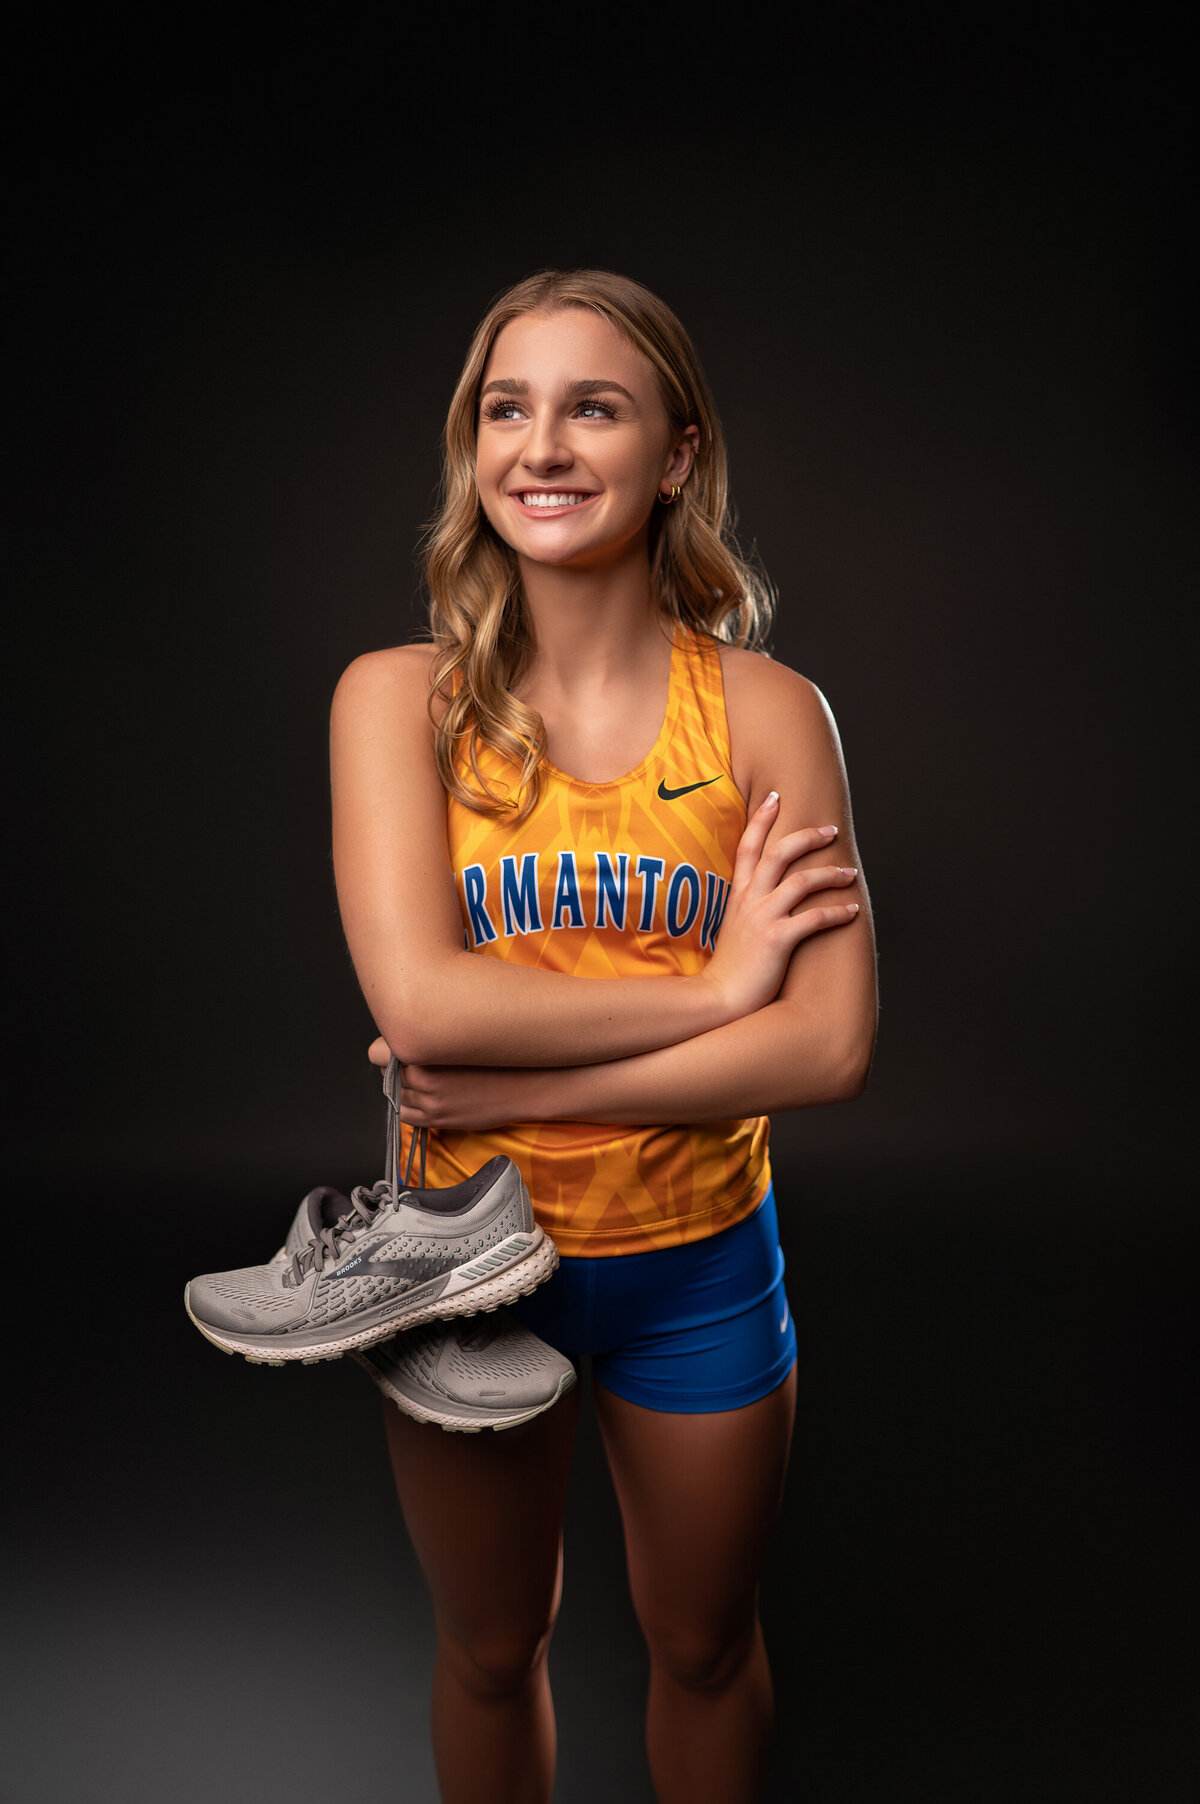 A girl from Germantown High School poses for her senior pictures wearing her track uniform in our Waukesha photo studio.